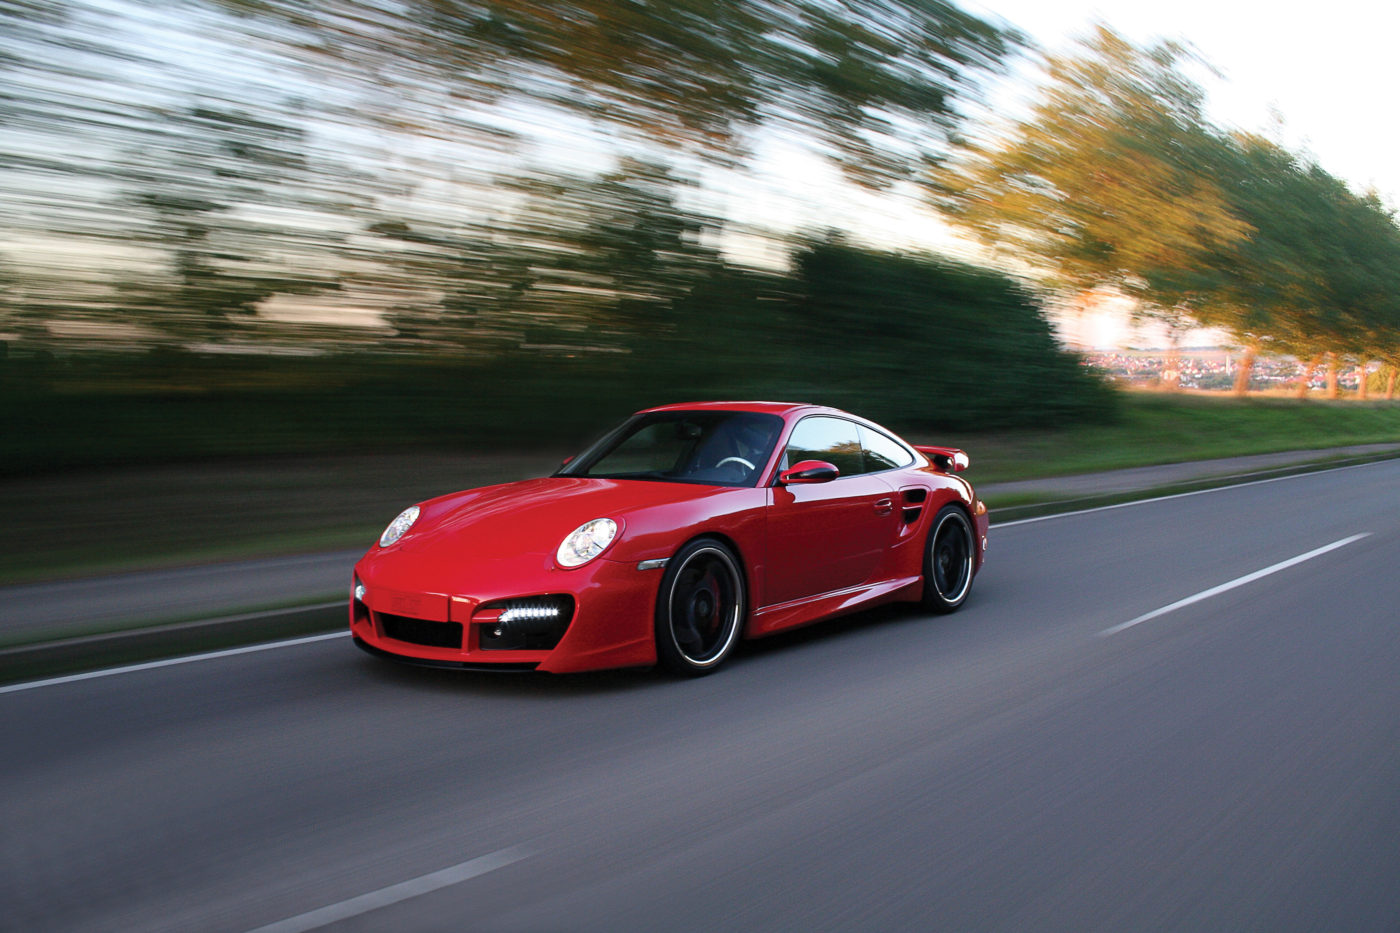 Porsche 911 Turbo Techart Tuning in red on road.